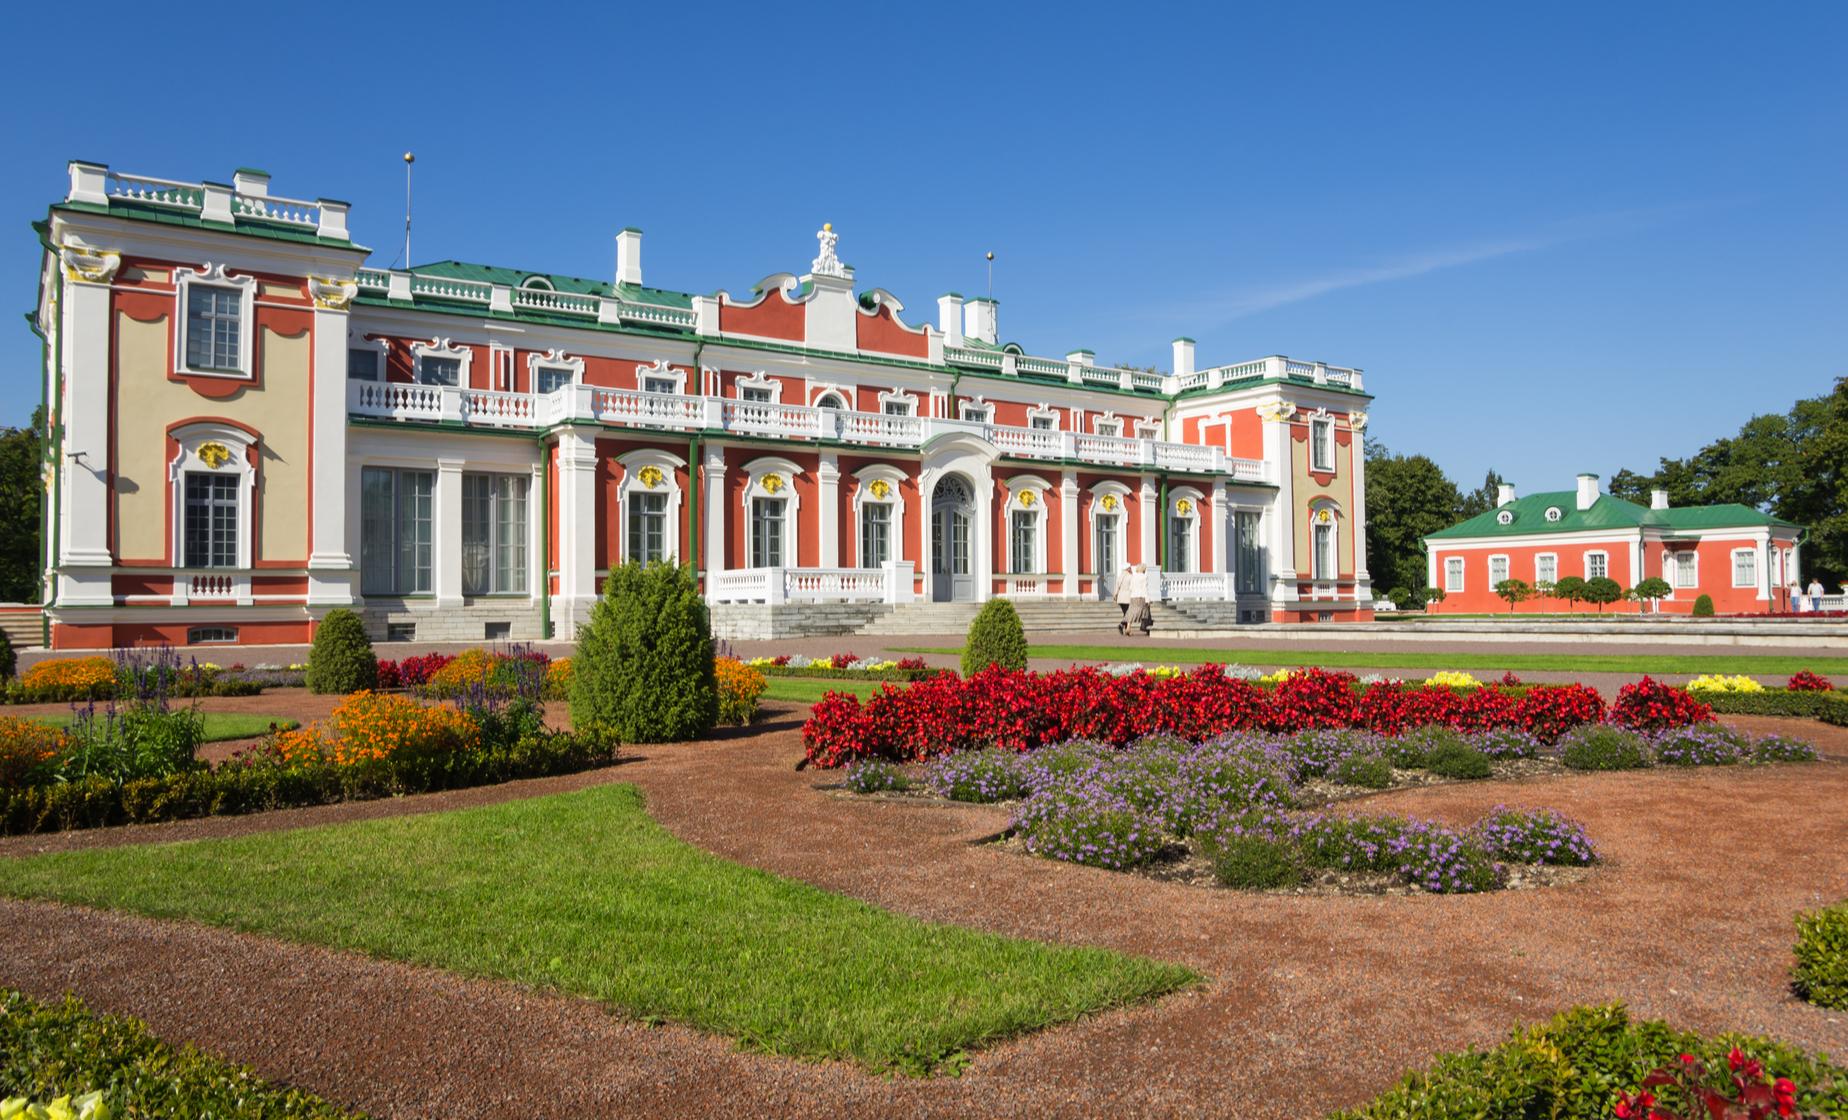 Private Kadriorg Palace and Upper Town Tour in Tallinn (National Library, Toompea Castle)